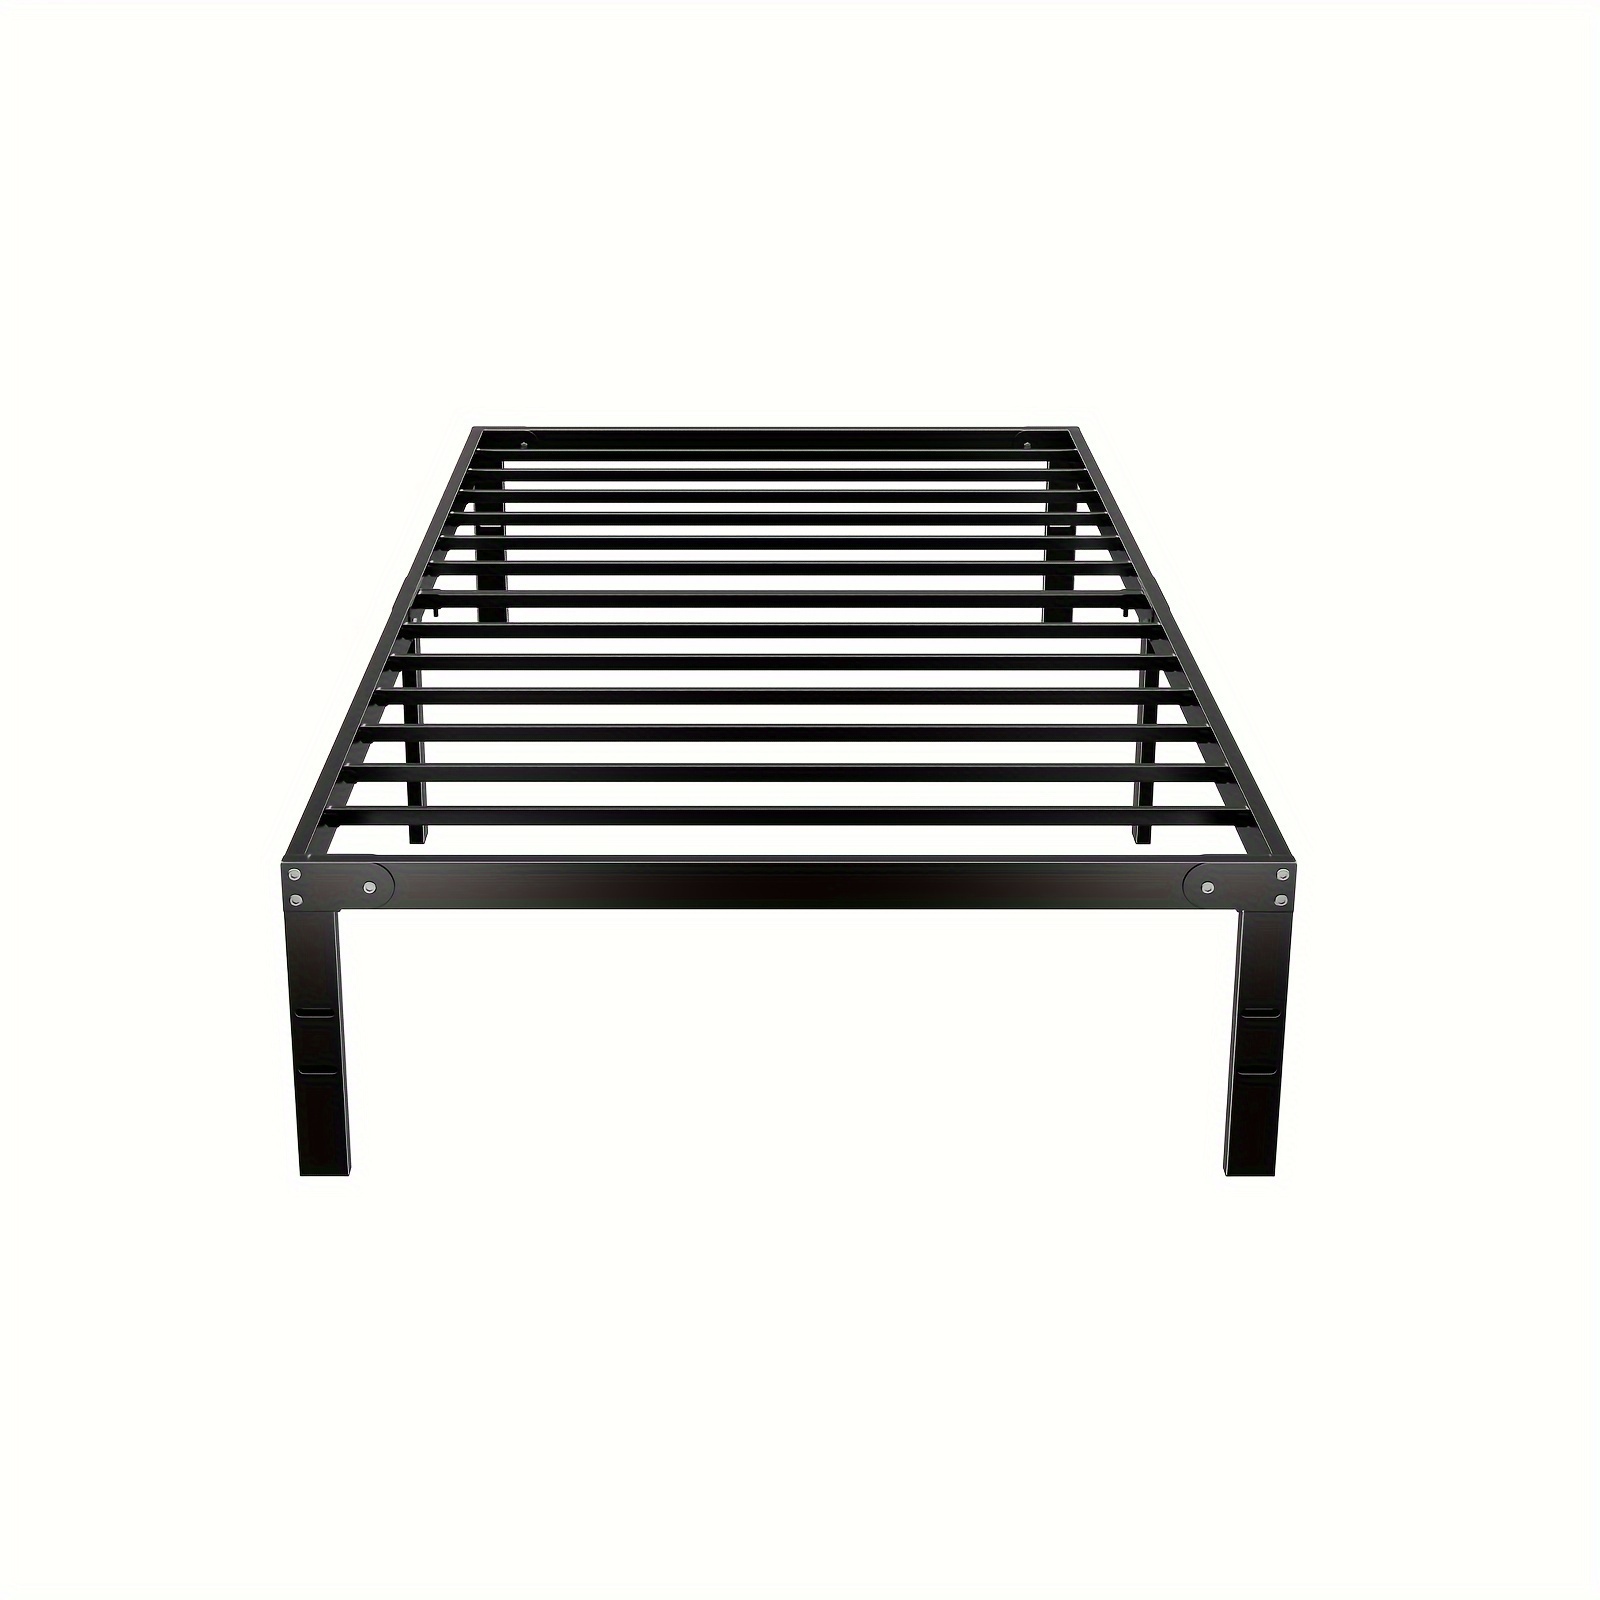 

Twin Size Black Metal Bed Frame With Sturdy Steel Slat Support-14 Inches High Heavy Duty Platform For Bedroom Providing Significant Storage Space